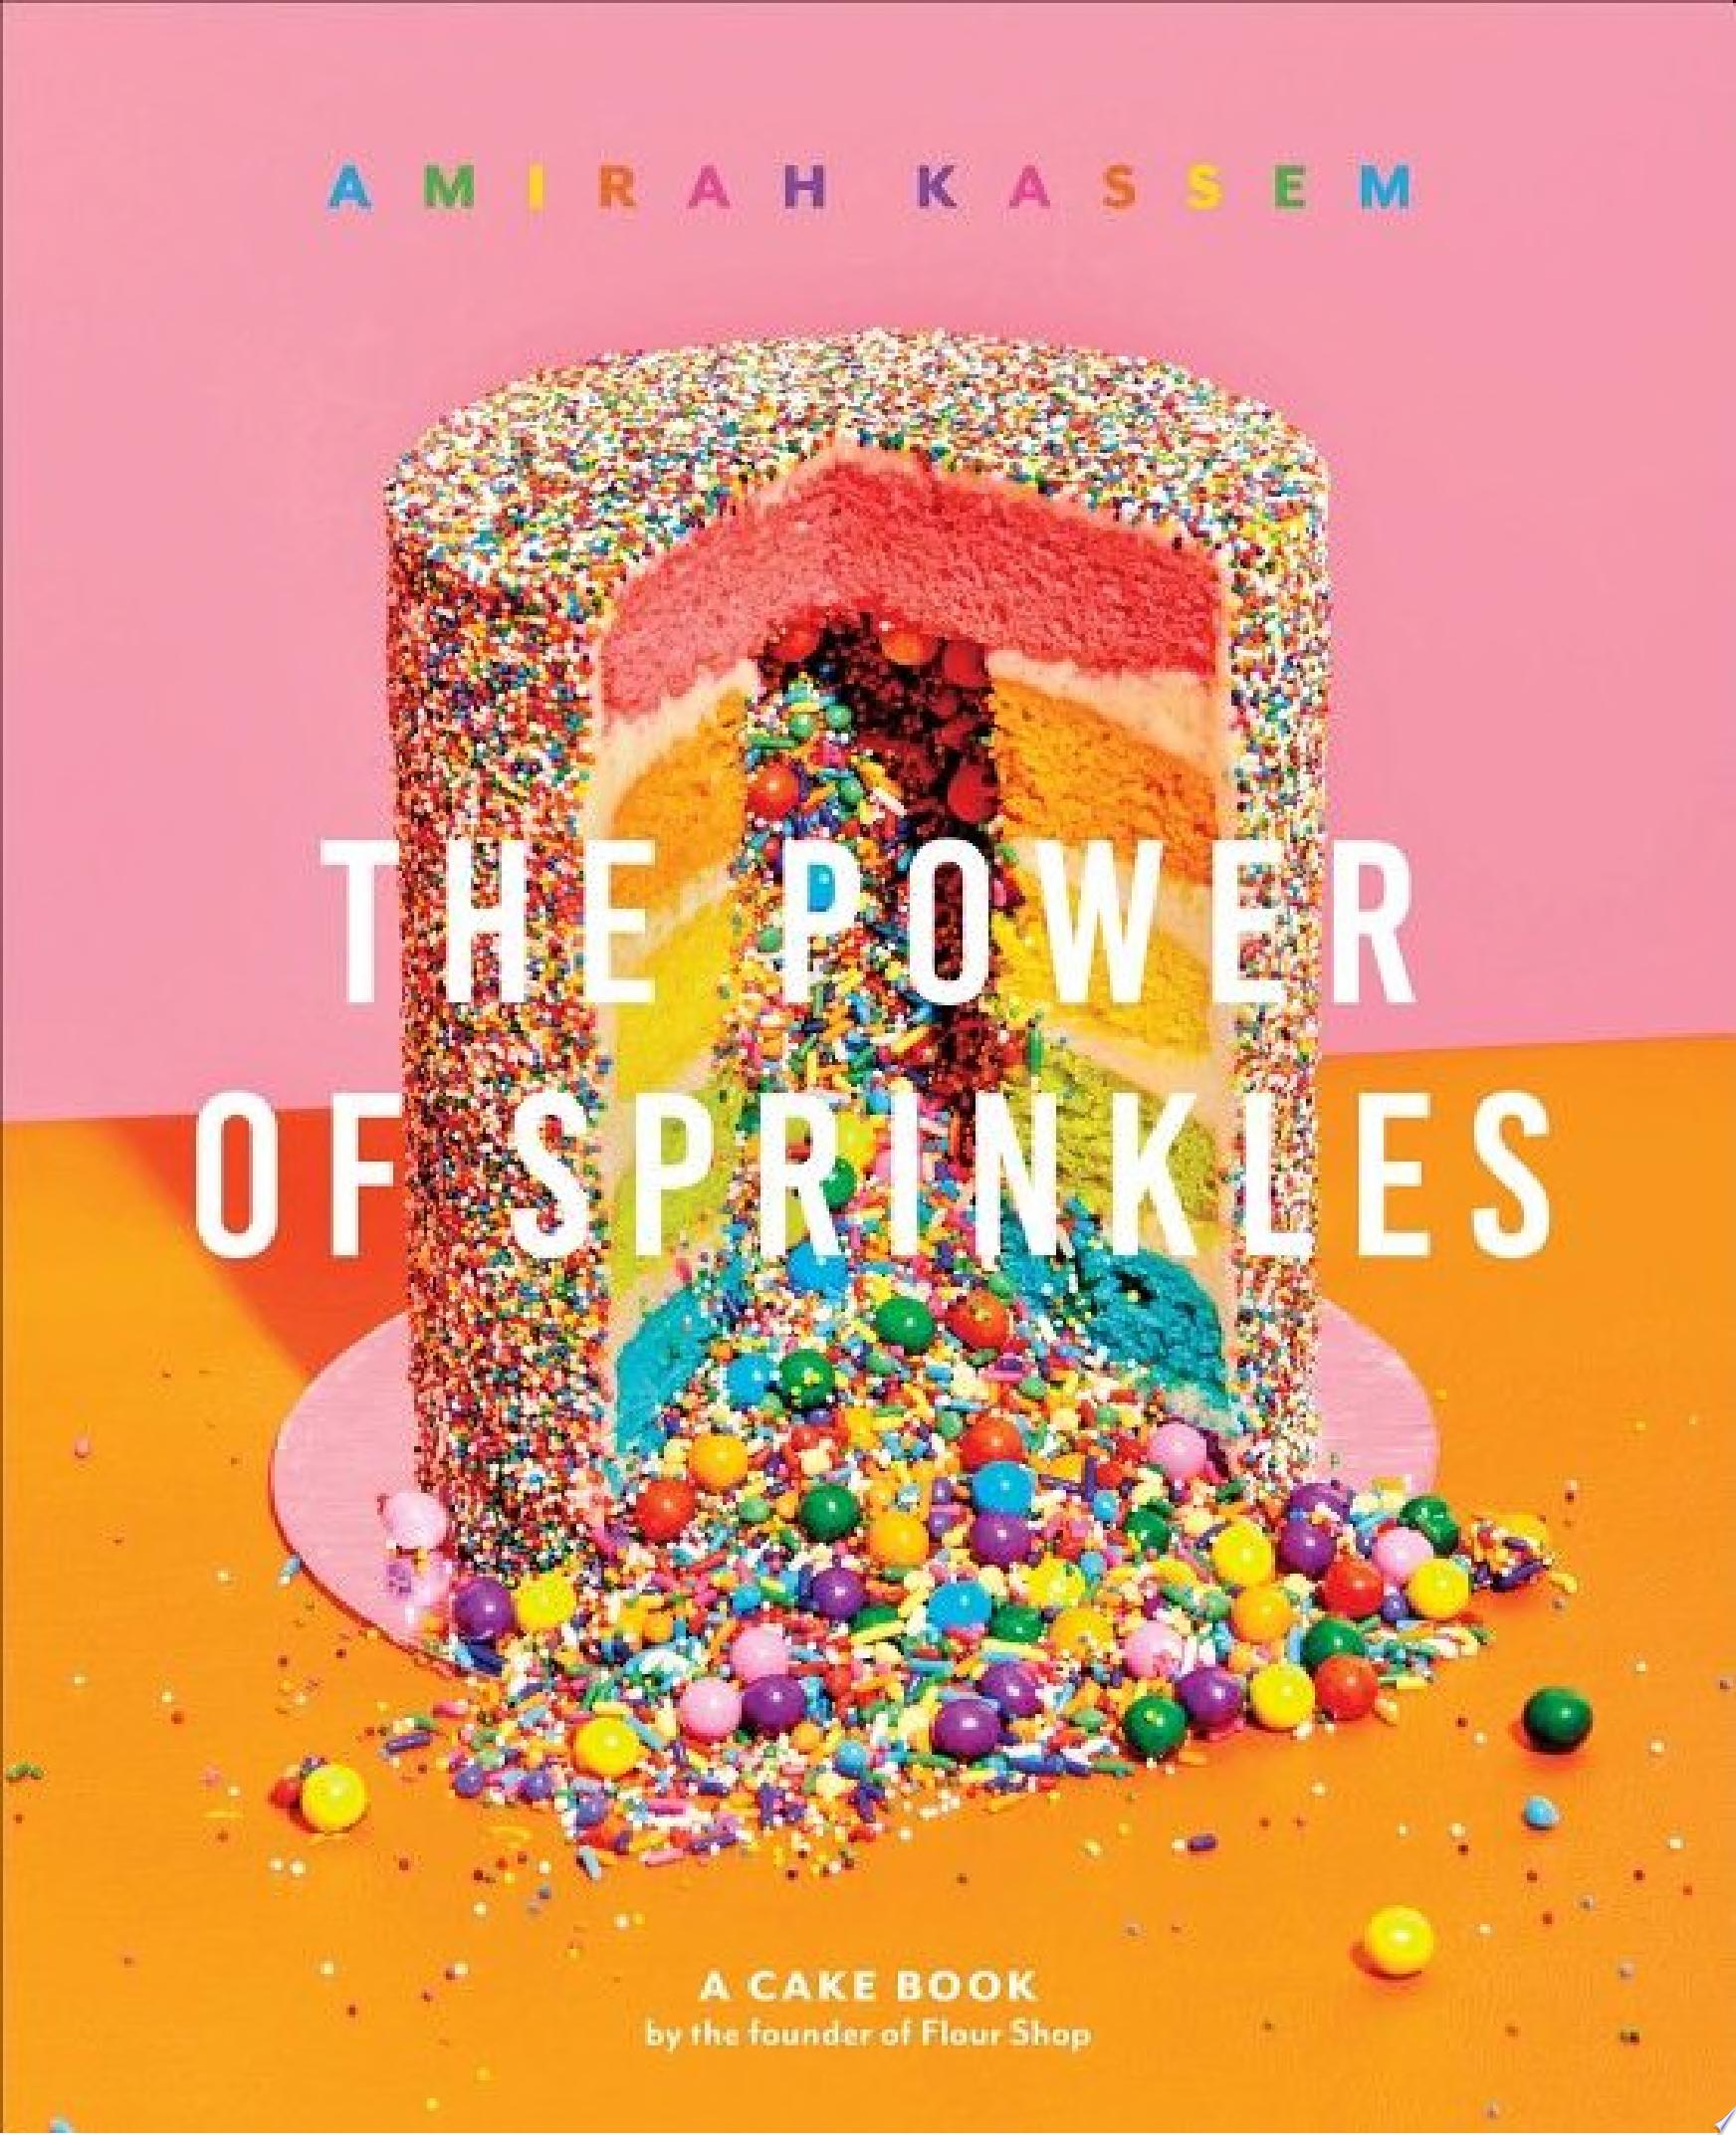 Image for "The Power of Sprinkles"